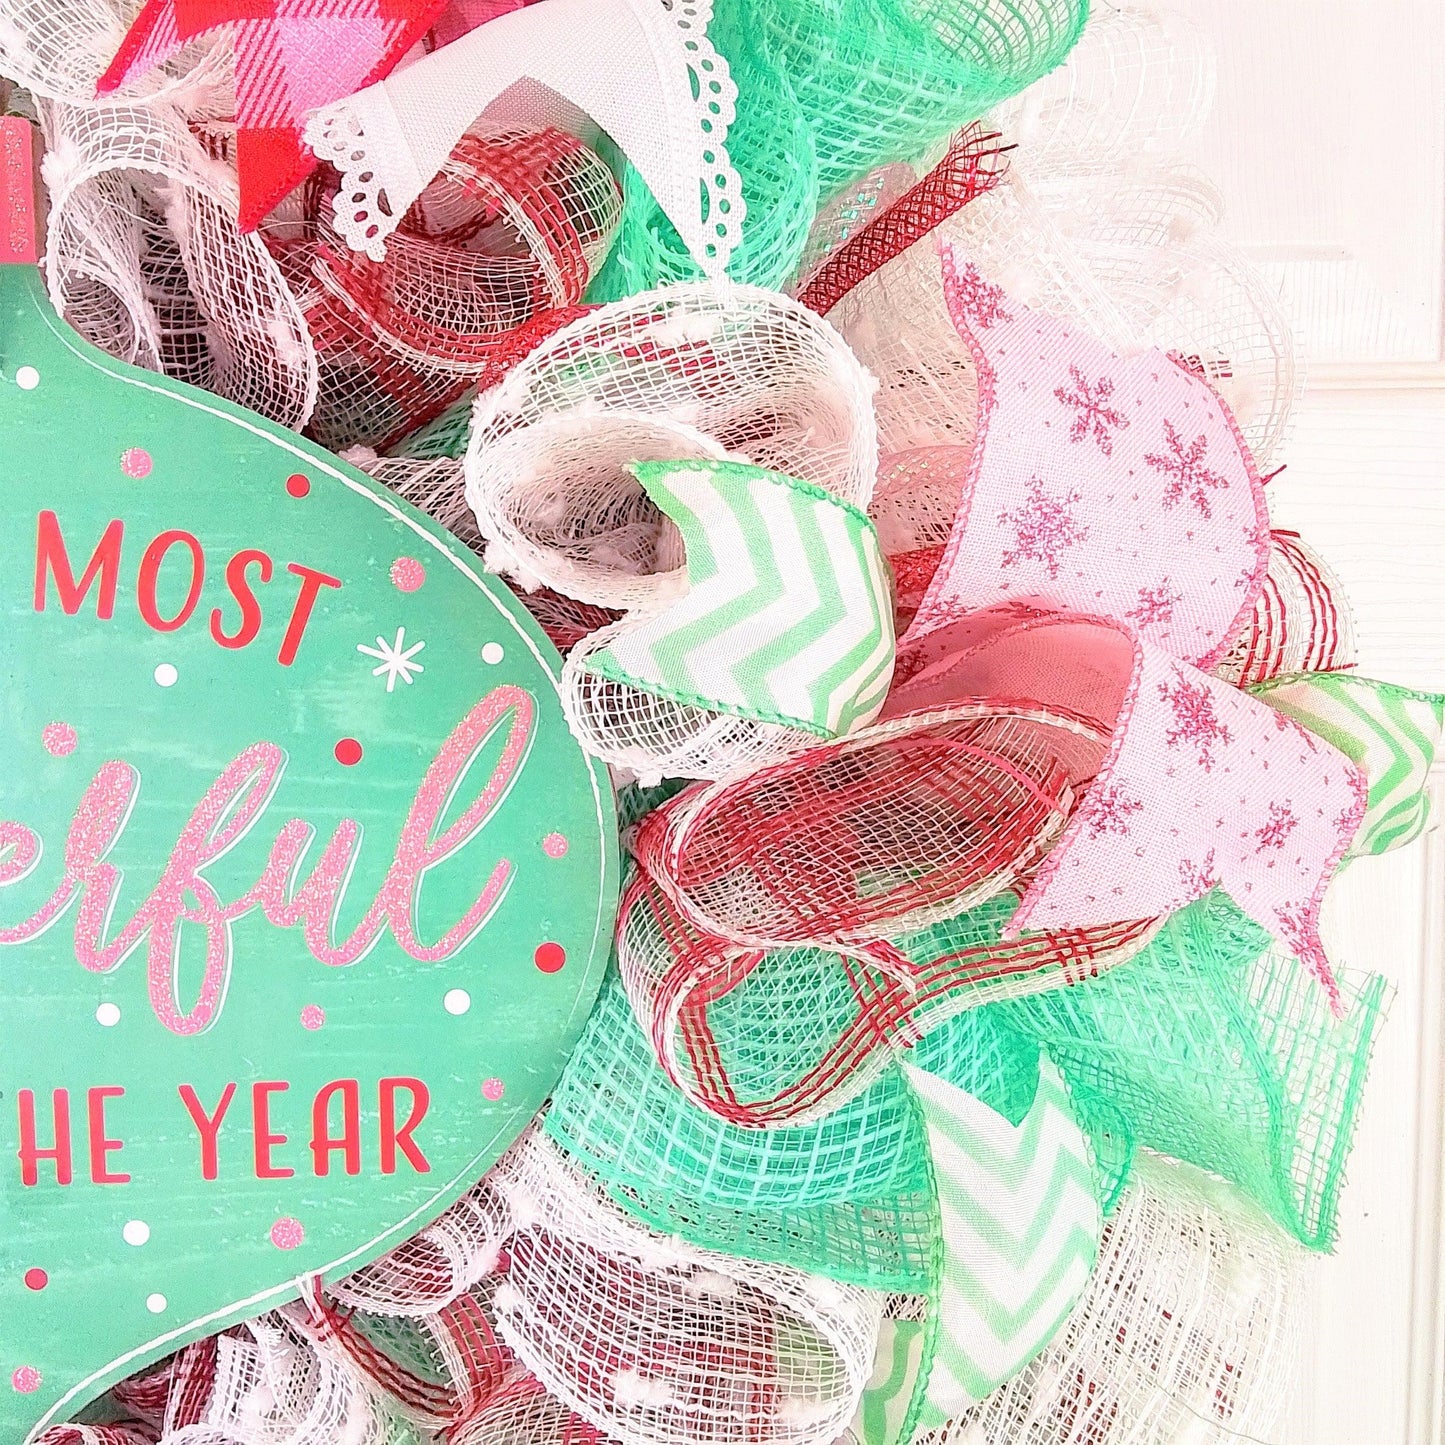 It's the Most Wonderful Time of the Year Ornament Wreath - Holiday Mesh Front Door Decor - Mint Green Red Pink - Pink Door Wreaths